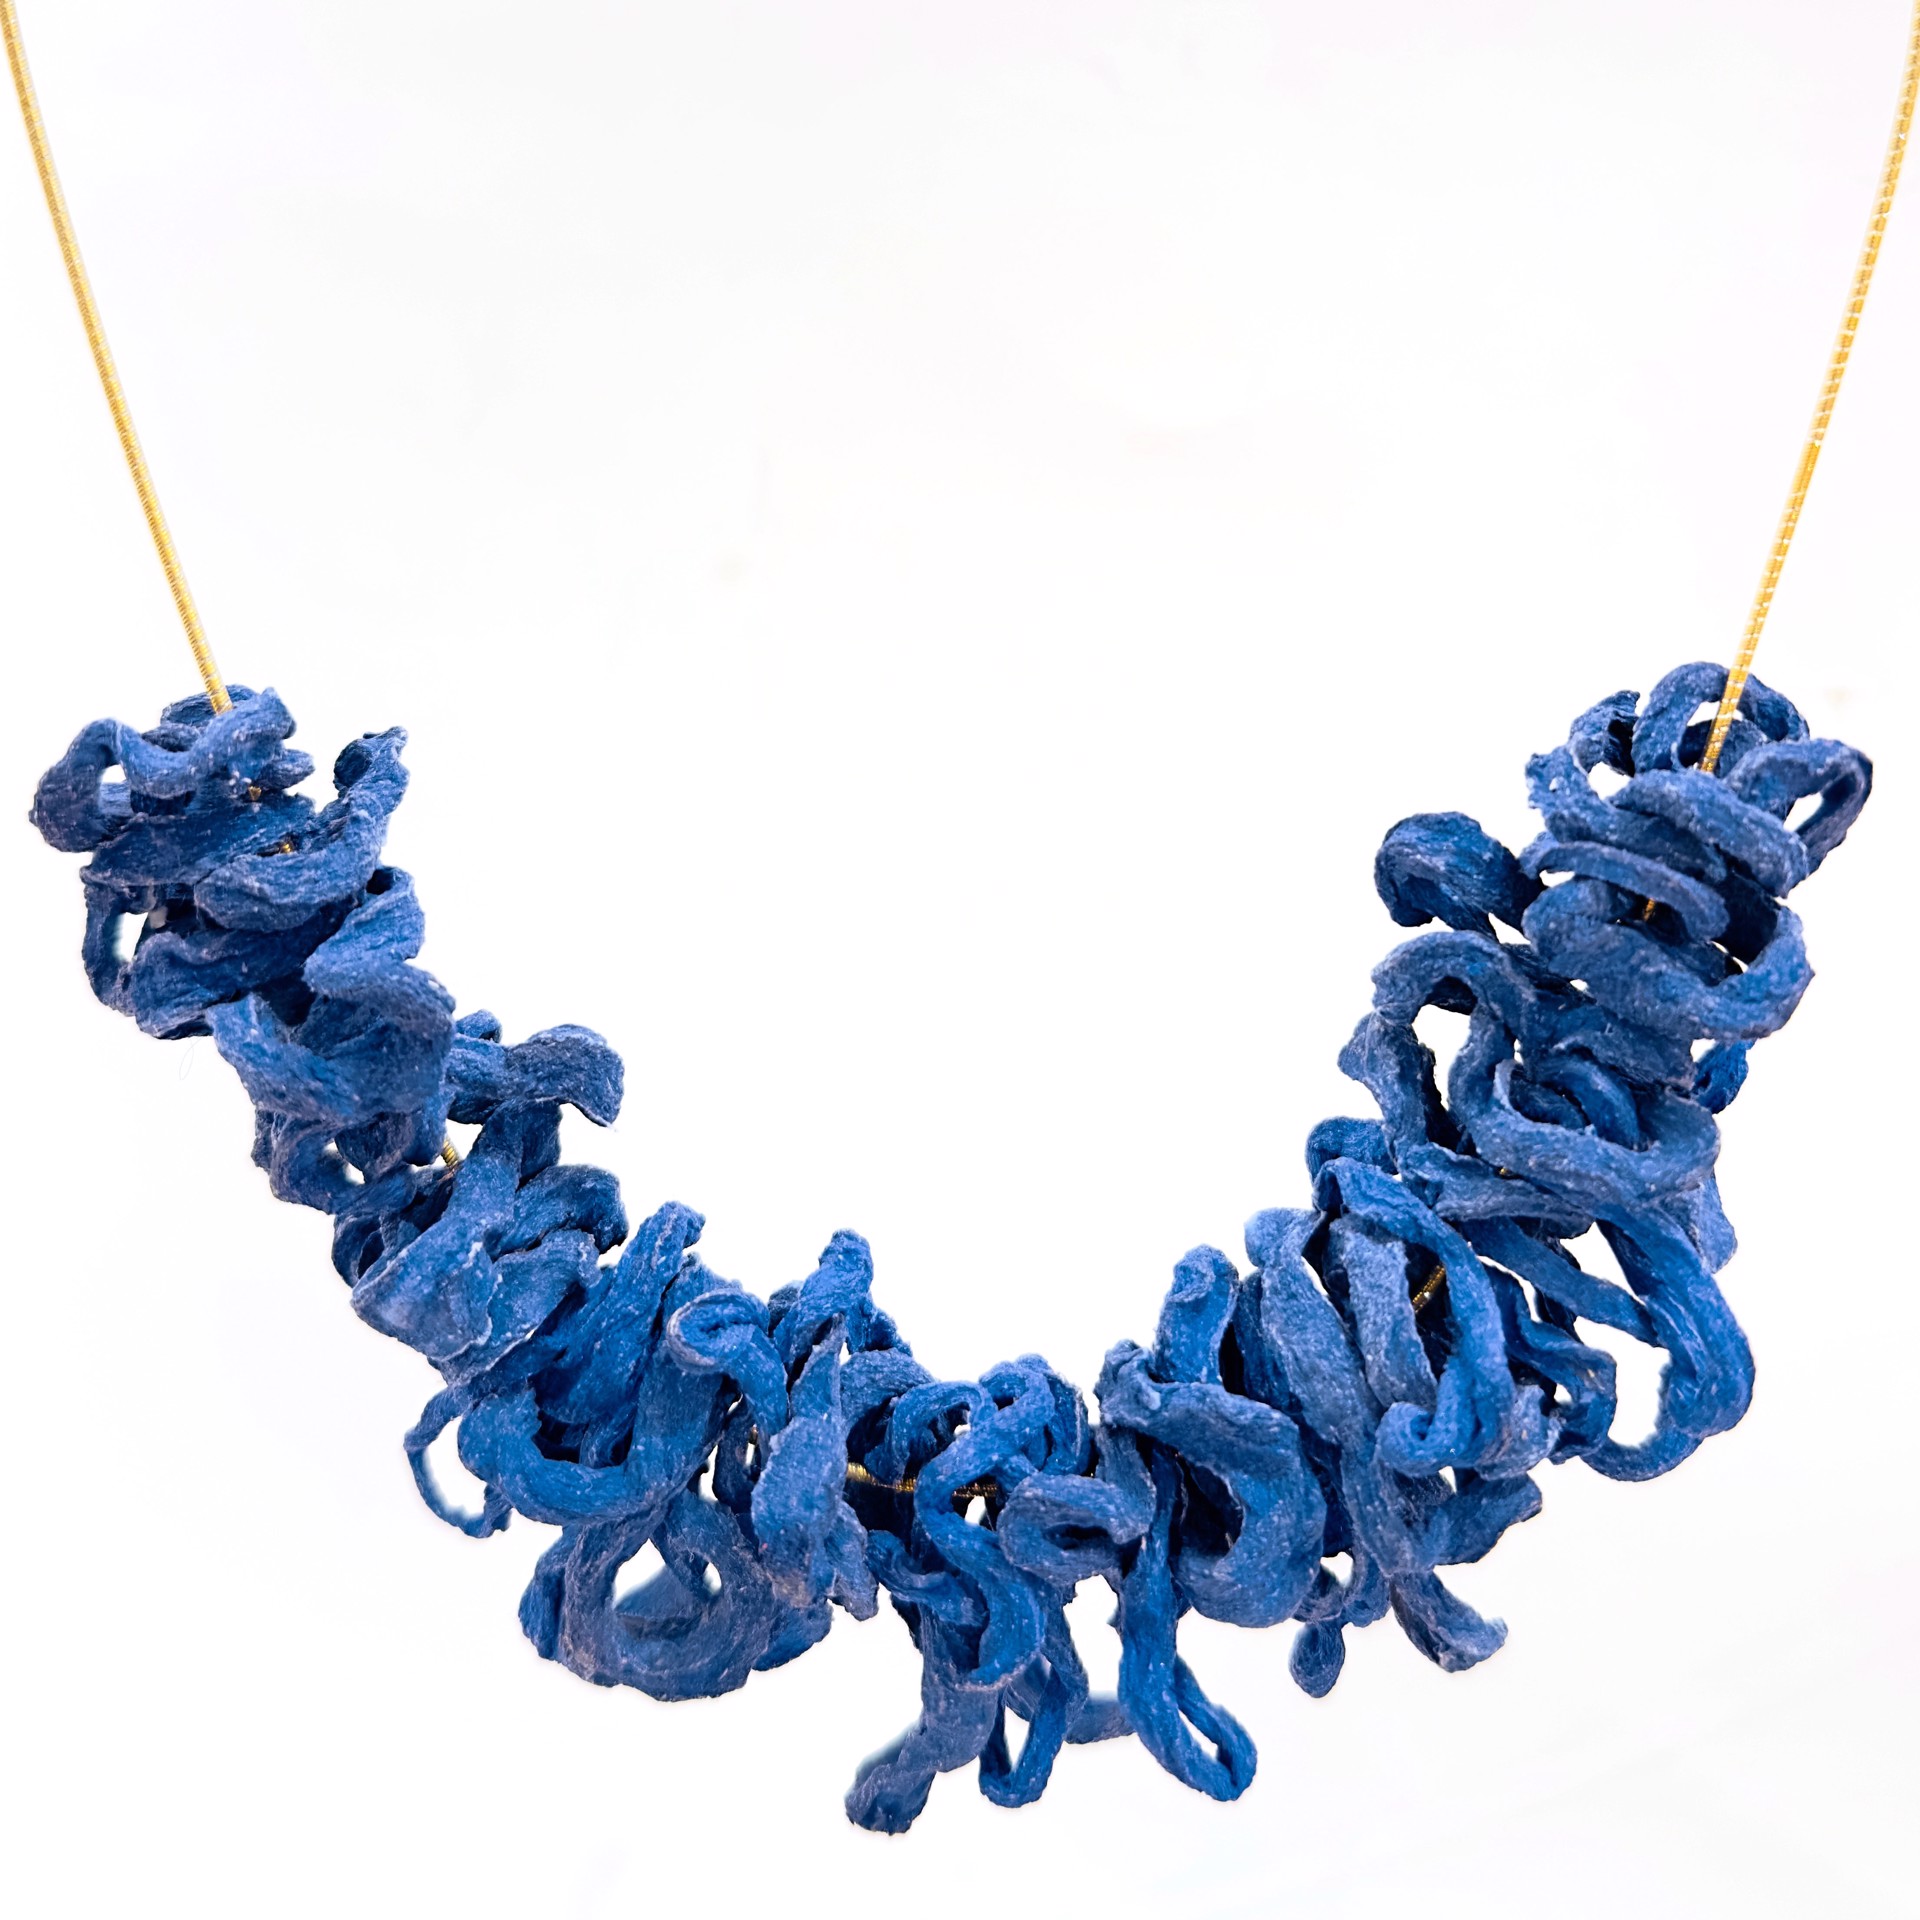 Paper Link Necklace by Sabrina Farrell